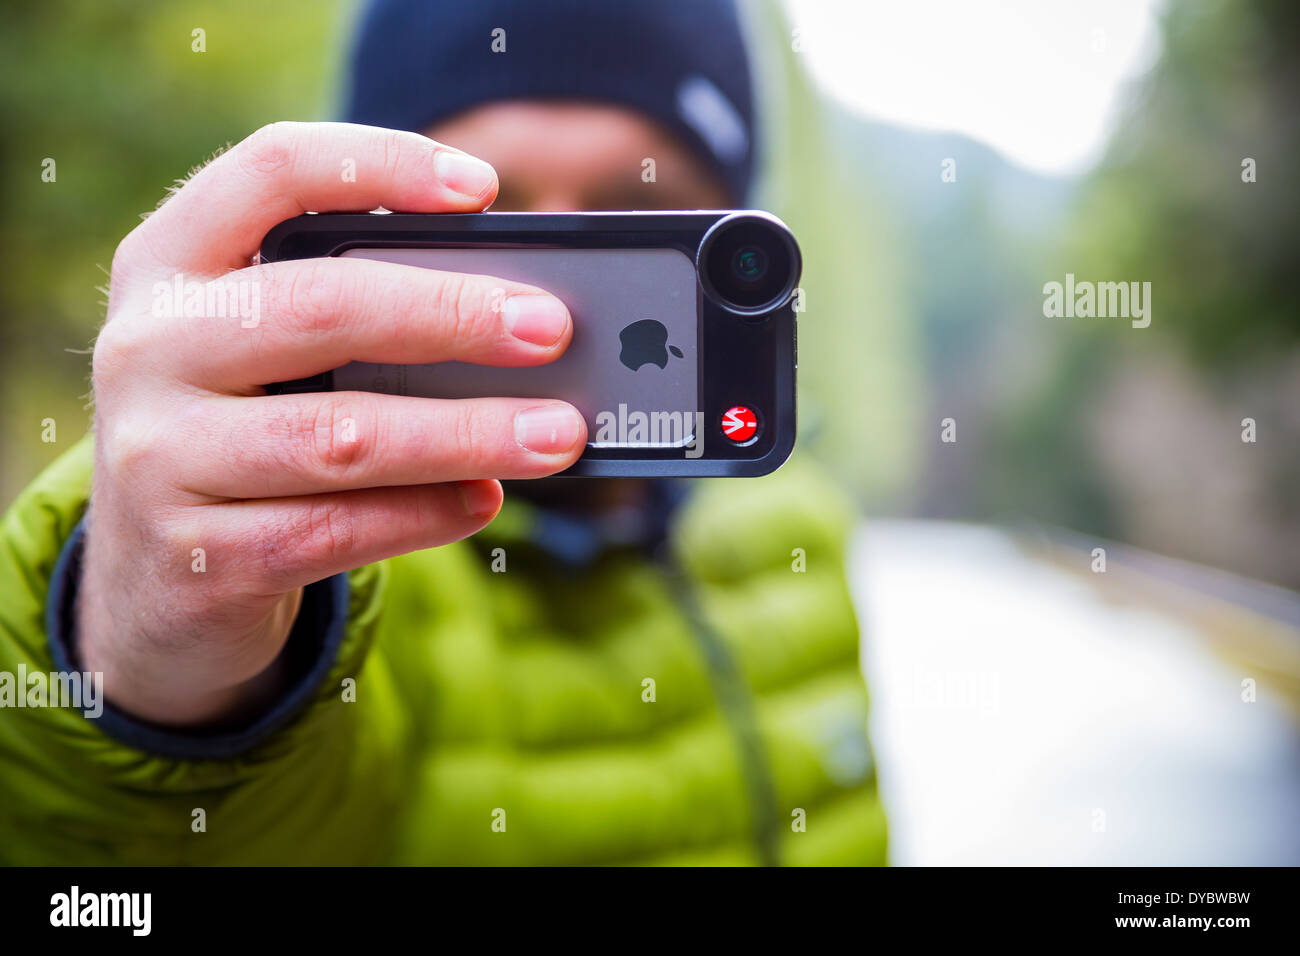 Oakridge, Oregon, USA - February 19,2014: Photographer using an iPhone 5S with Manfrotto lens attached outdoors. Stock Photo